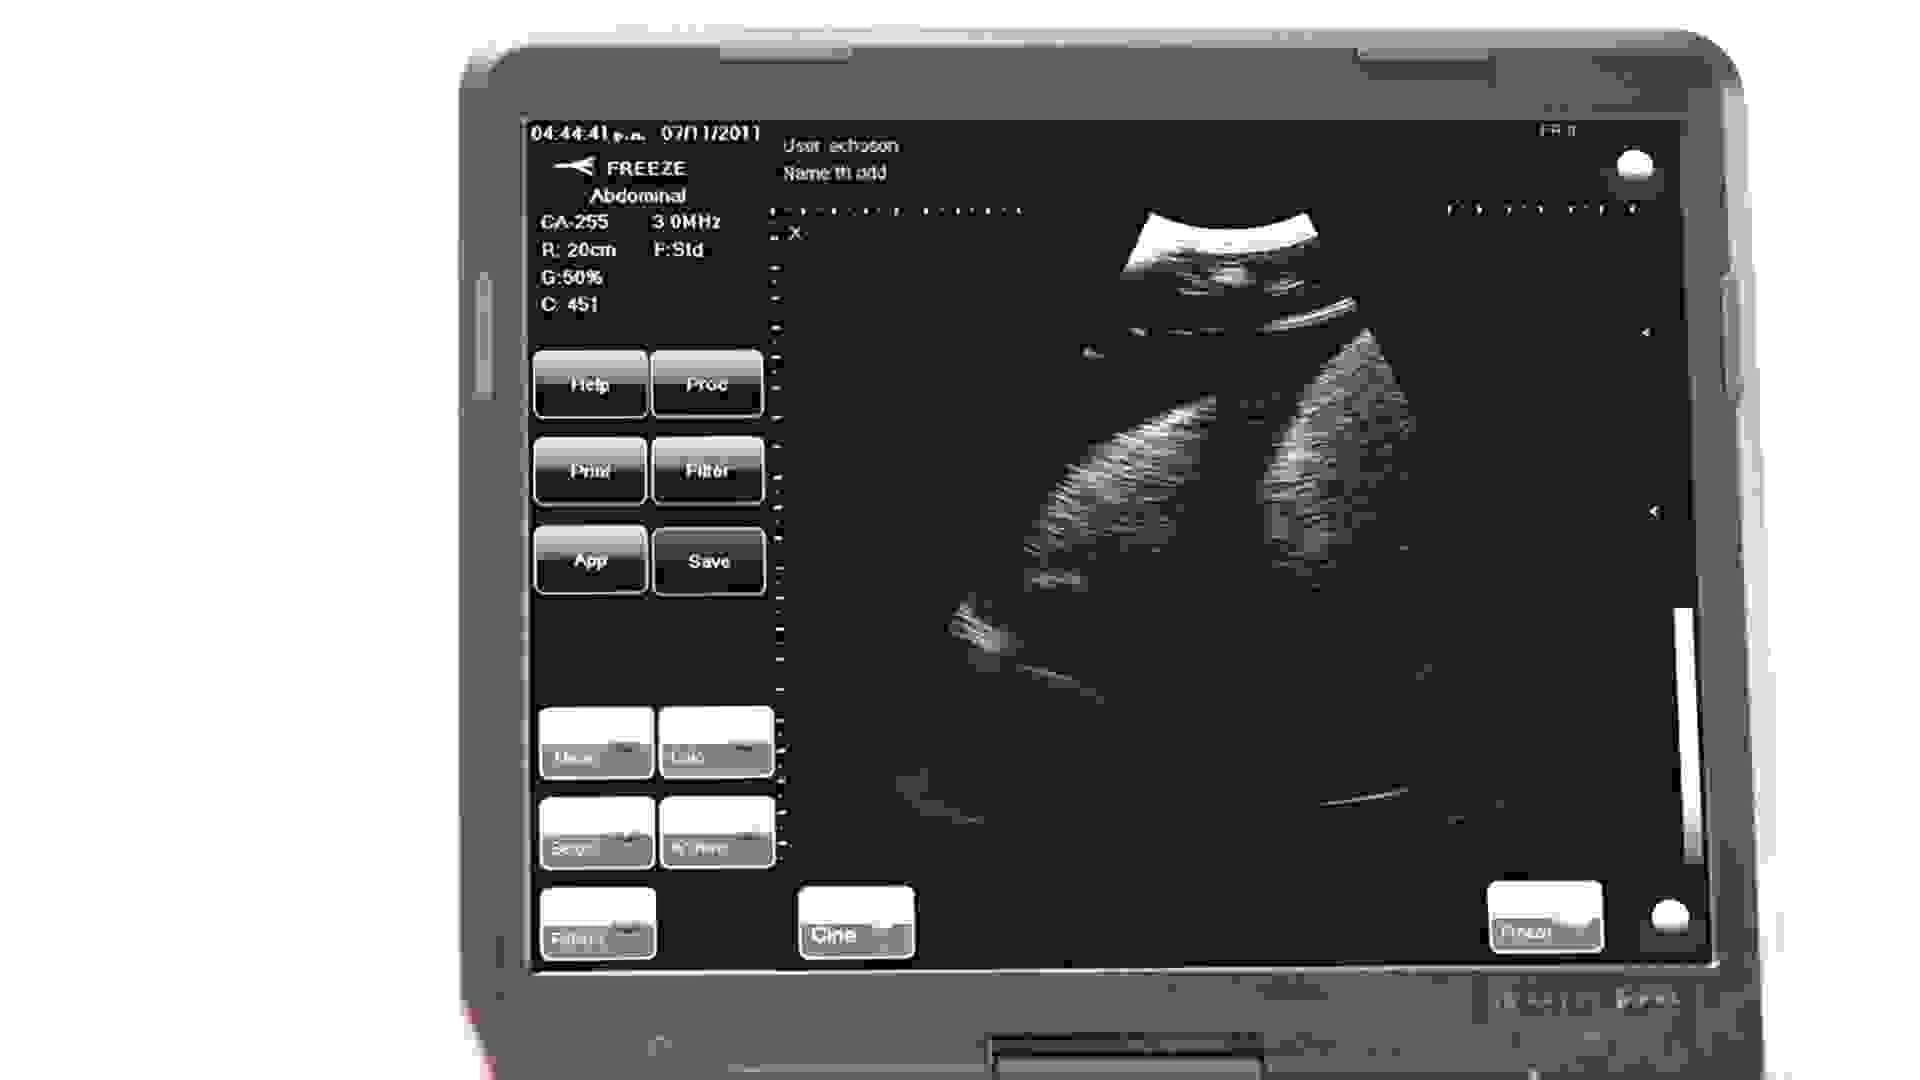 Ultrasound guided techniques practice on the chest drain model